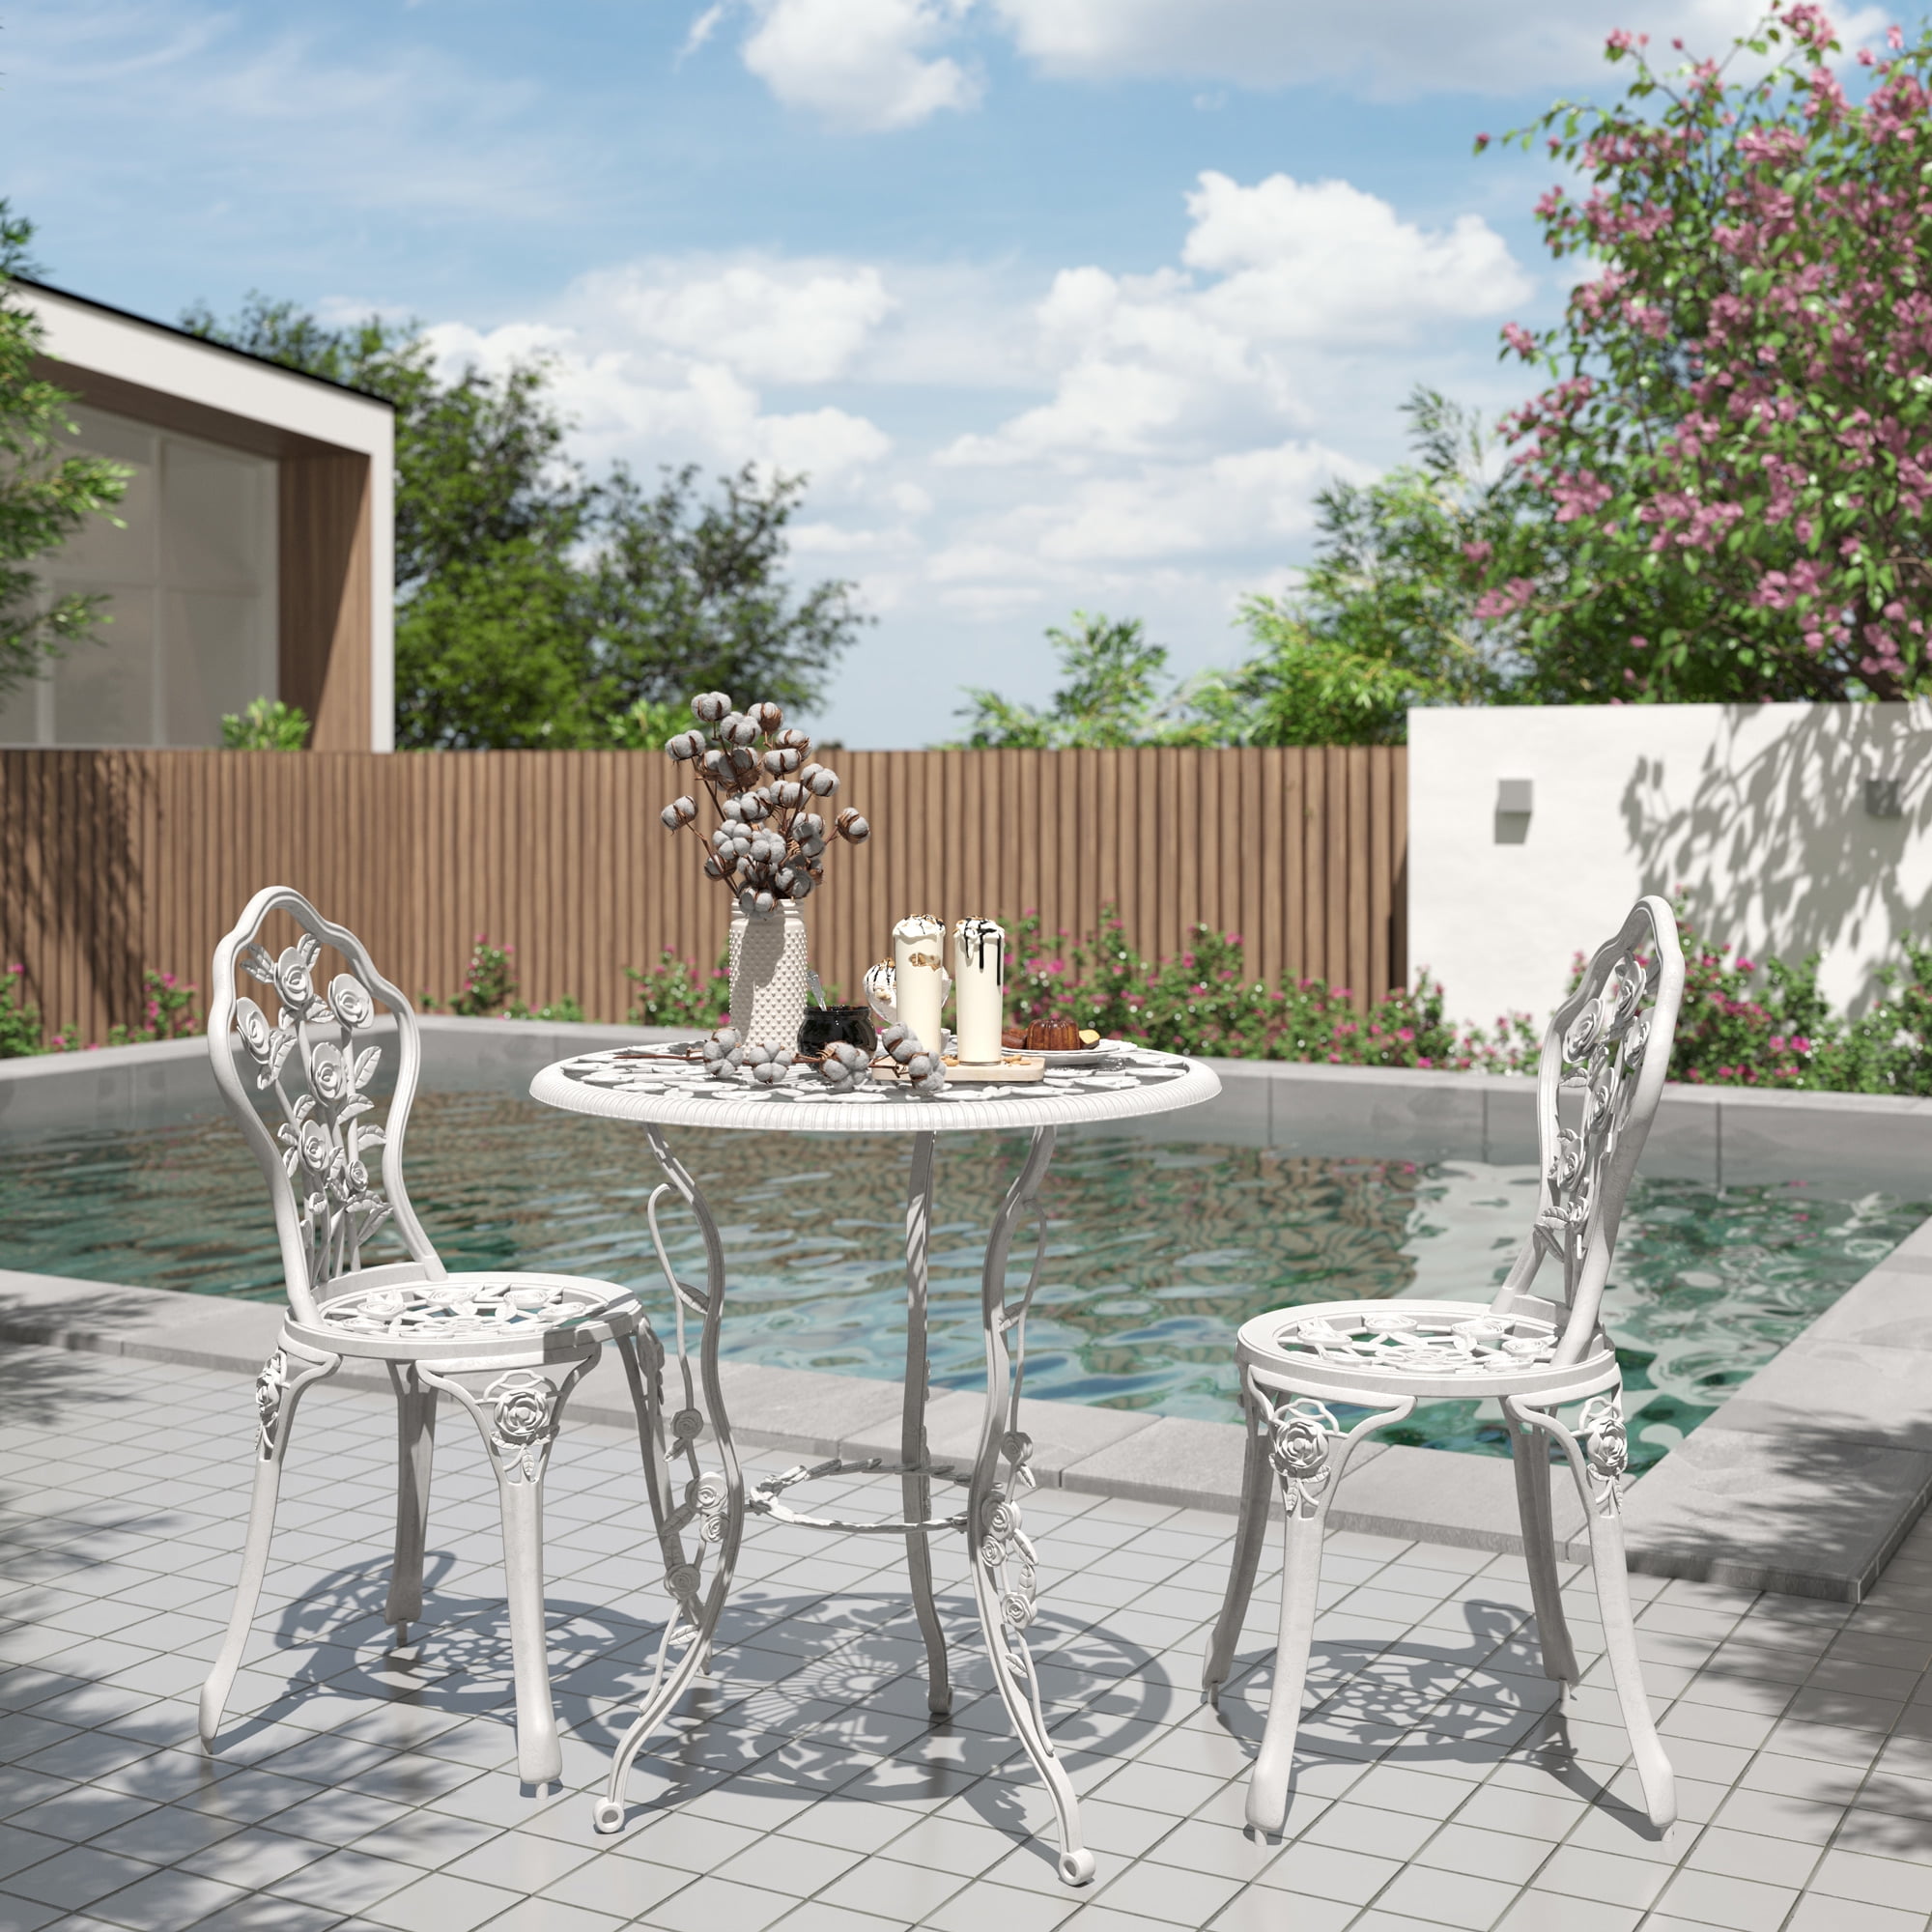 Image of White bistro patio set with round table and two metal chairs